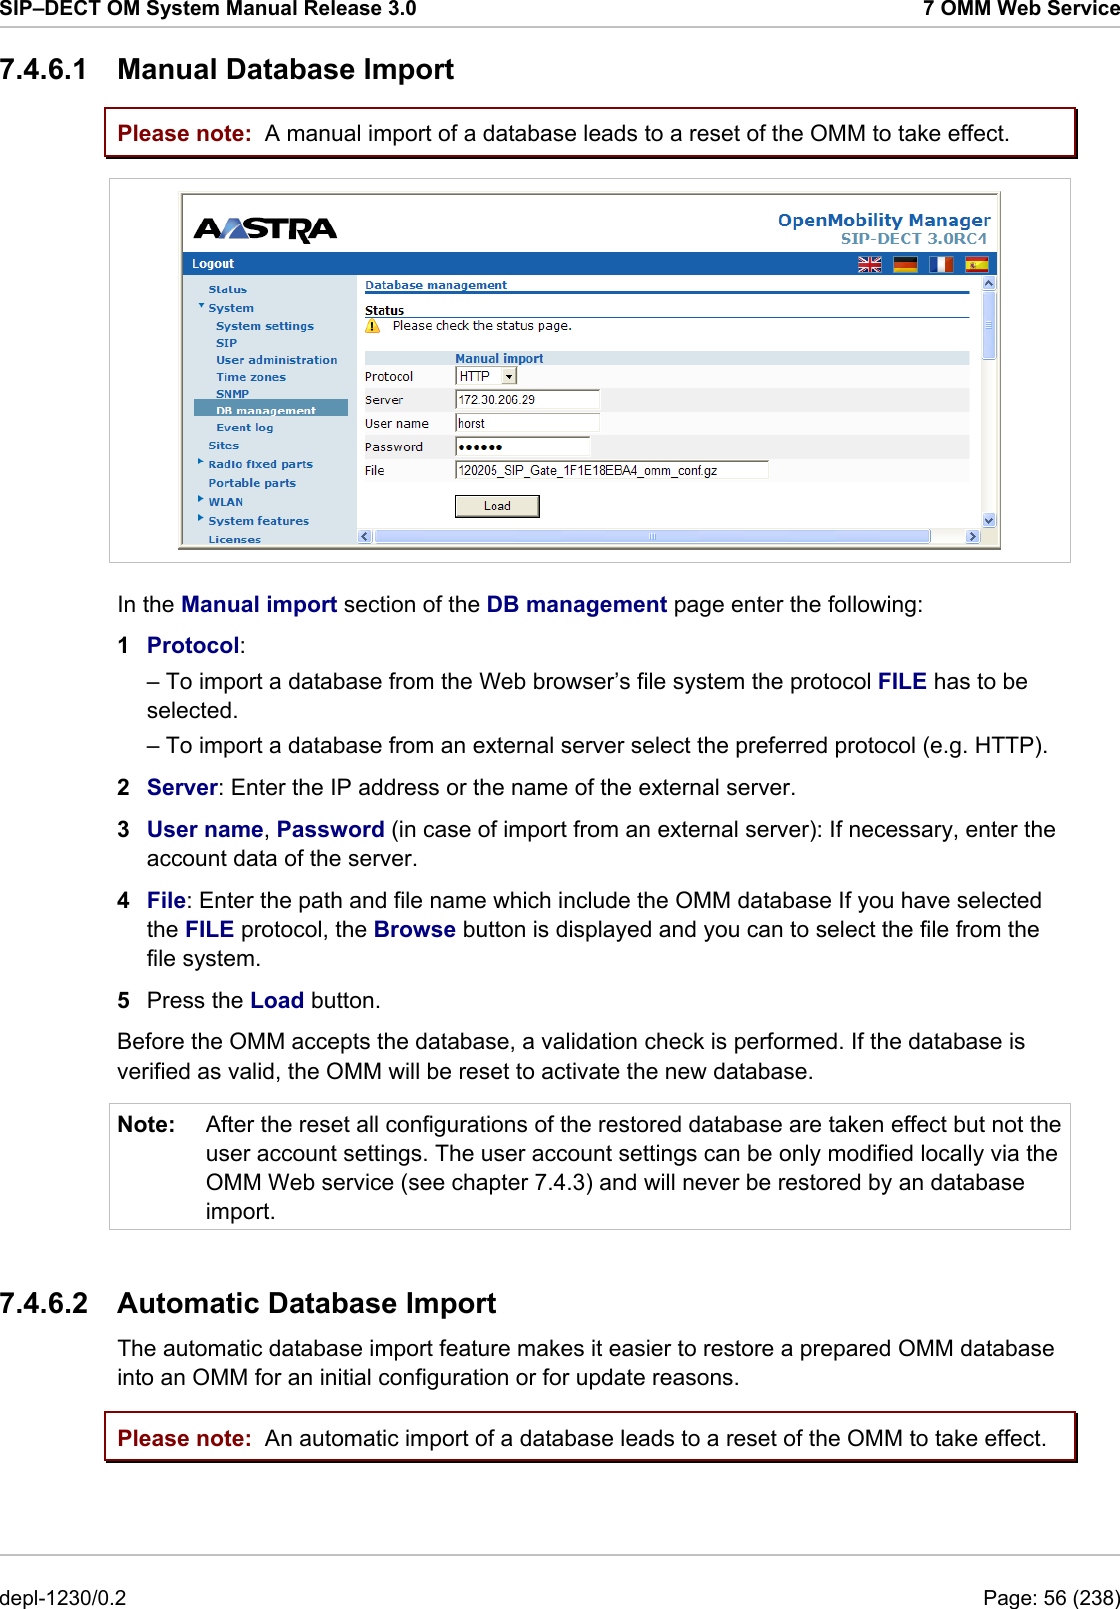 SIP–DECT OM System Manual Release 3.0  7 OMM Web Service 7.4.6.1 Manual Database Import Please note: Please note: A manual import of a database leads to a reset of the OMM to take effect.  In the Manual import section of the DB management page enter the following:  1  Protocol:  – To import a database from the Web browser’s file system the protocol FILE has to be selected. – To import a database from an external server select the preferred protocol (e.g. HTTP). 2  Server: Enter the IP address or the name of the external server. 3  User name, Password (in case of import from an external server): If necessary, enter the account data of the server. 4  File: Enter the path and file name which include the OMM database If you have selected the FILE protocol, the Browse button is displayed and you can to select the file from the file system. 5  Press the Load button.  Before the OMM accepts the database, a validation check is performed. If the database is verified as valid, the OMM will be reset to activate the new database. Note:  After the reset all configurations of the restored database are taken effect but not the user account settings. The user account settings can be only modified locally via the OMM Web service (see chapter 7.4.3) and will never be restored by an database import.  7.4.6.2  Automatic Database Import The automatic database import feature makes it easier to restore a prepared OMM database into an OMM for an initial configuration or for update reasons. An automatic import of a database leads to a reset of the OMM to take effect. depl-1230/0.2  Page: 56 (238) 